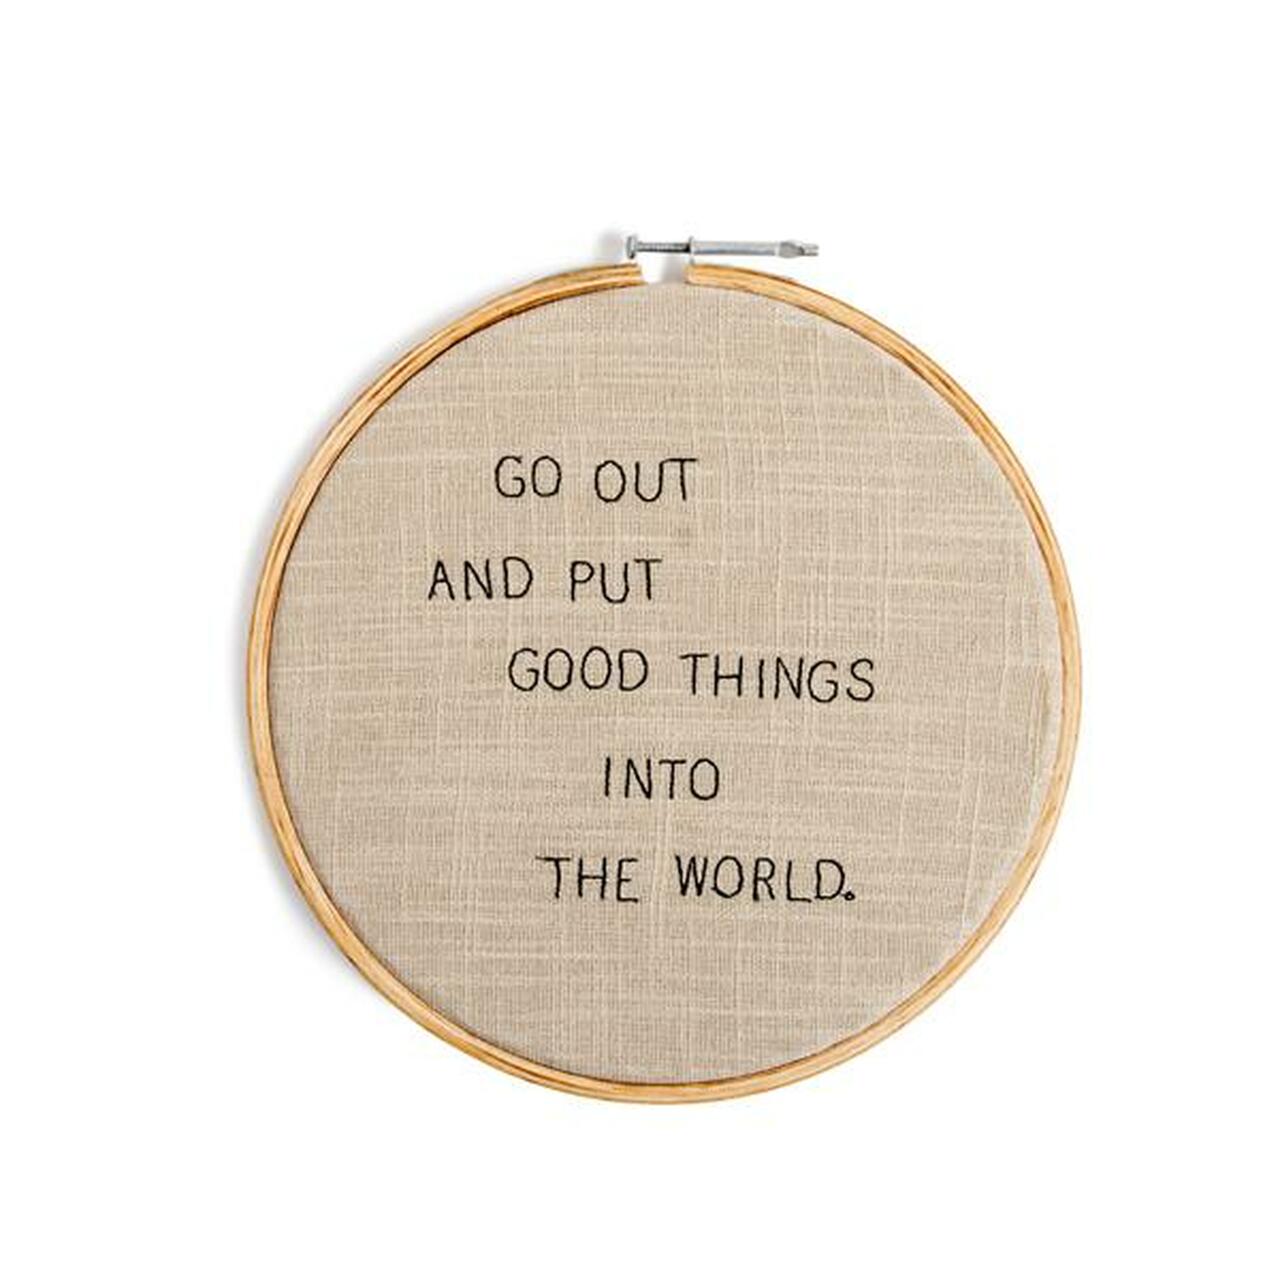 Go Out And Put Good Things Into The World - Embroidery Hoop